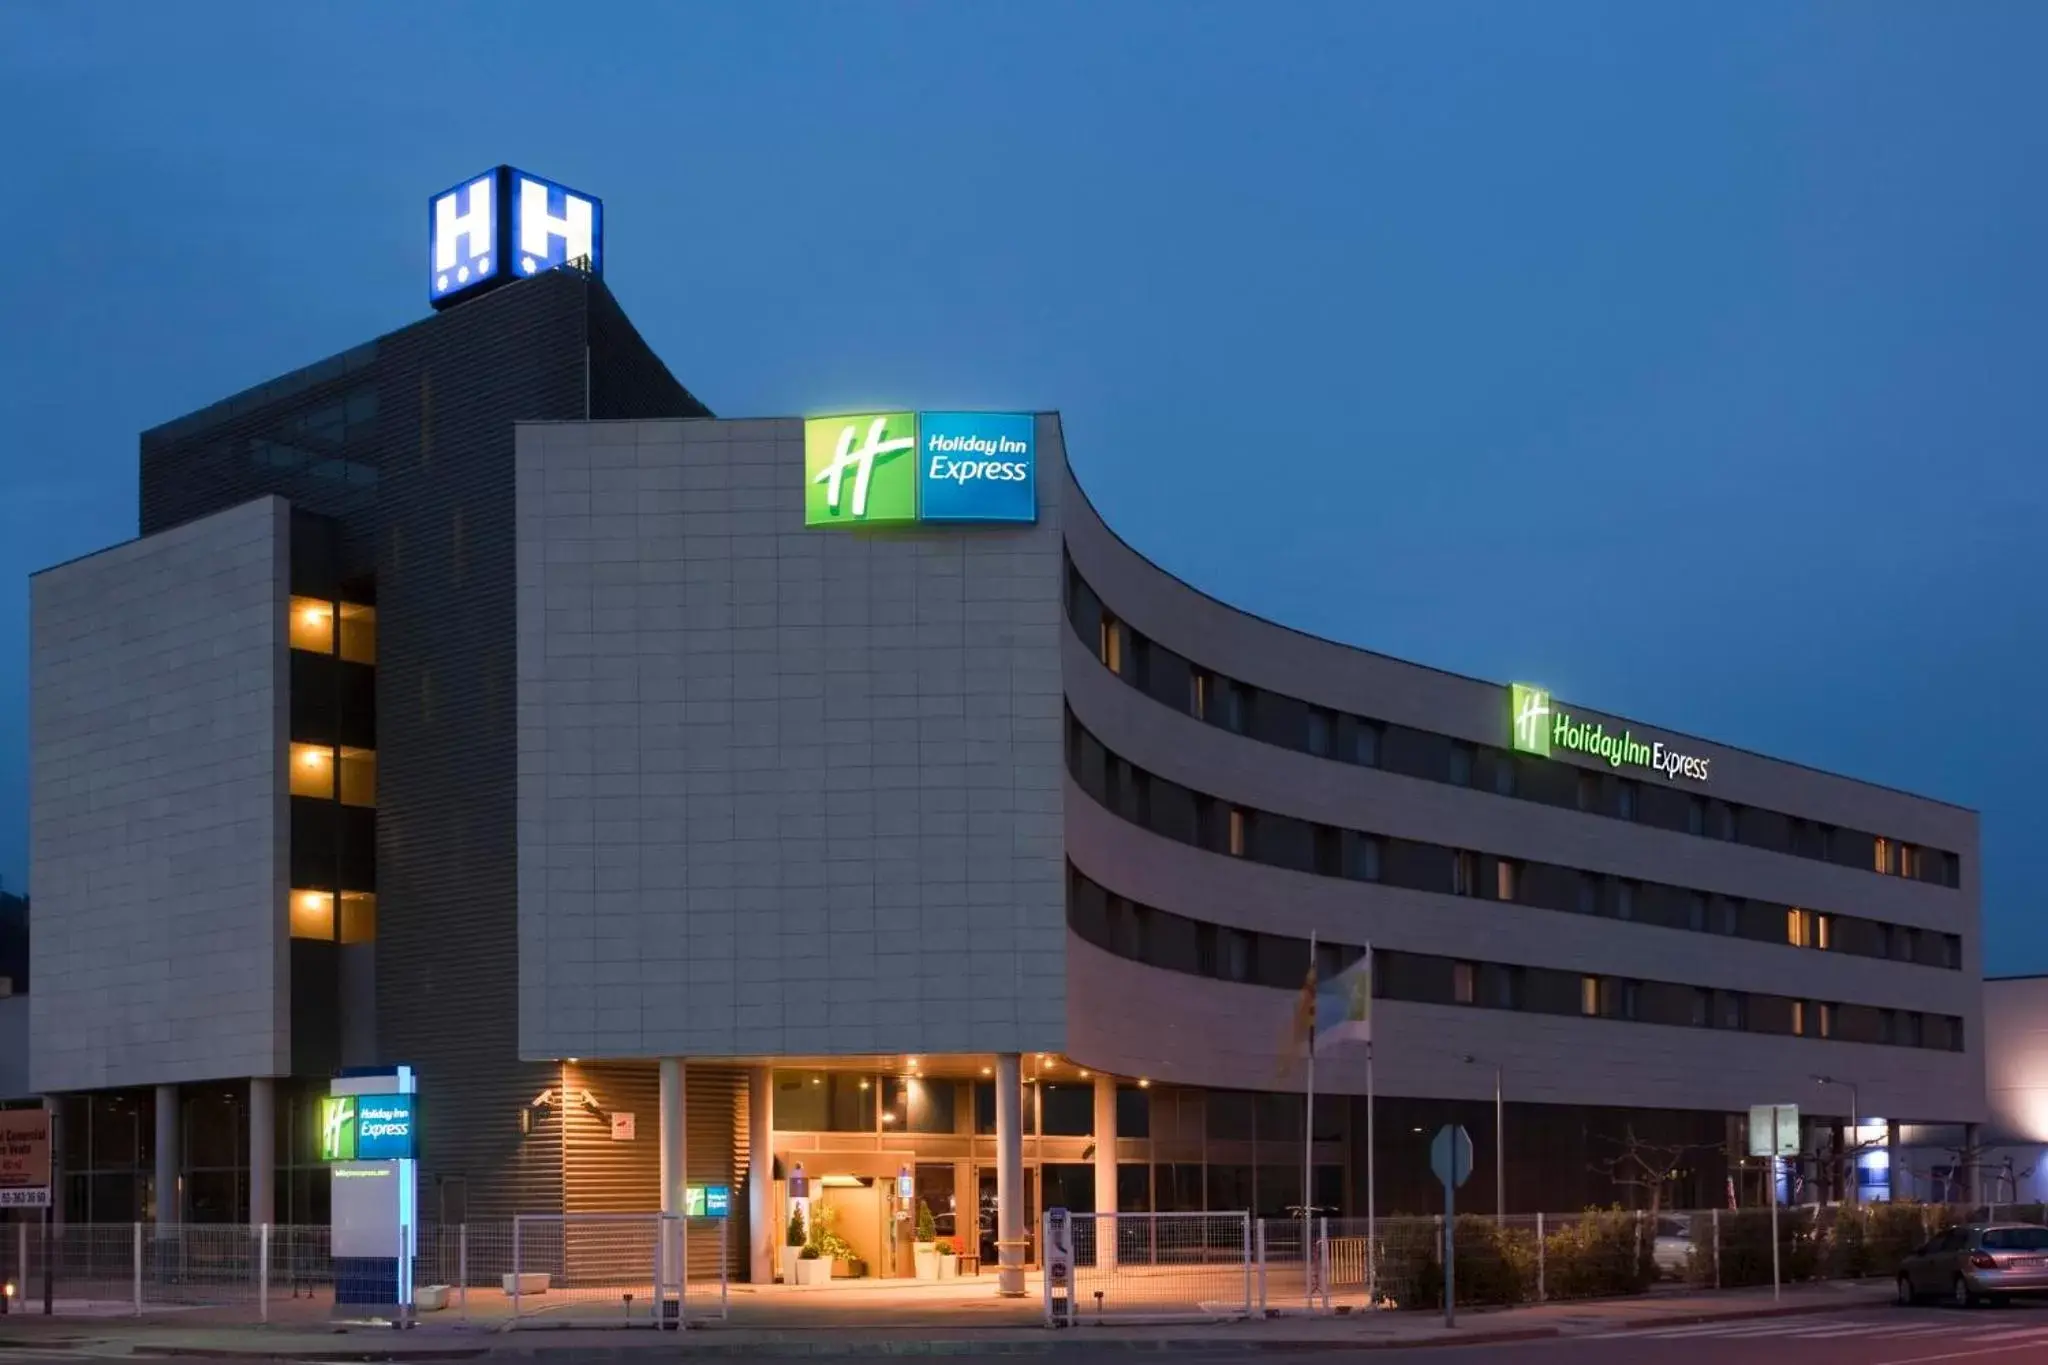 Property Building in Holiday Inn Express Molins de Rei